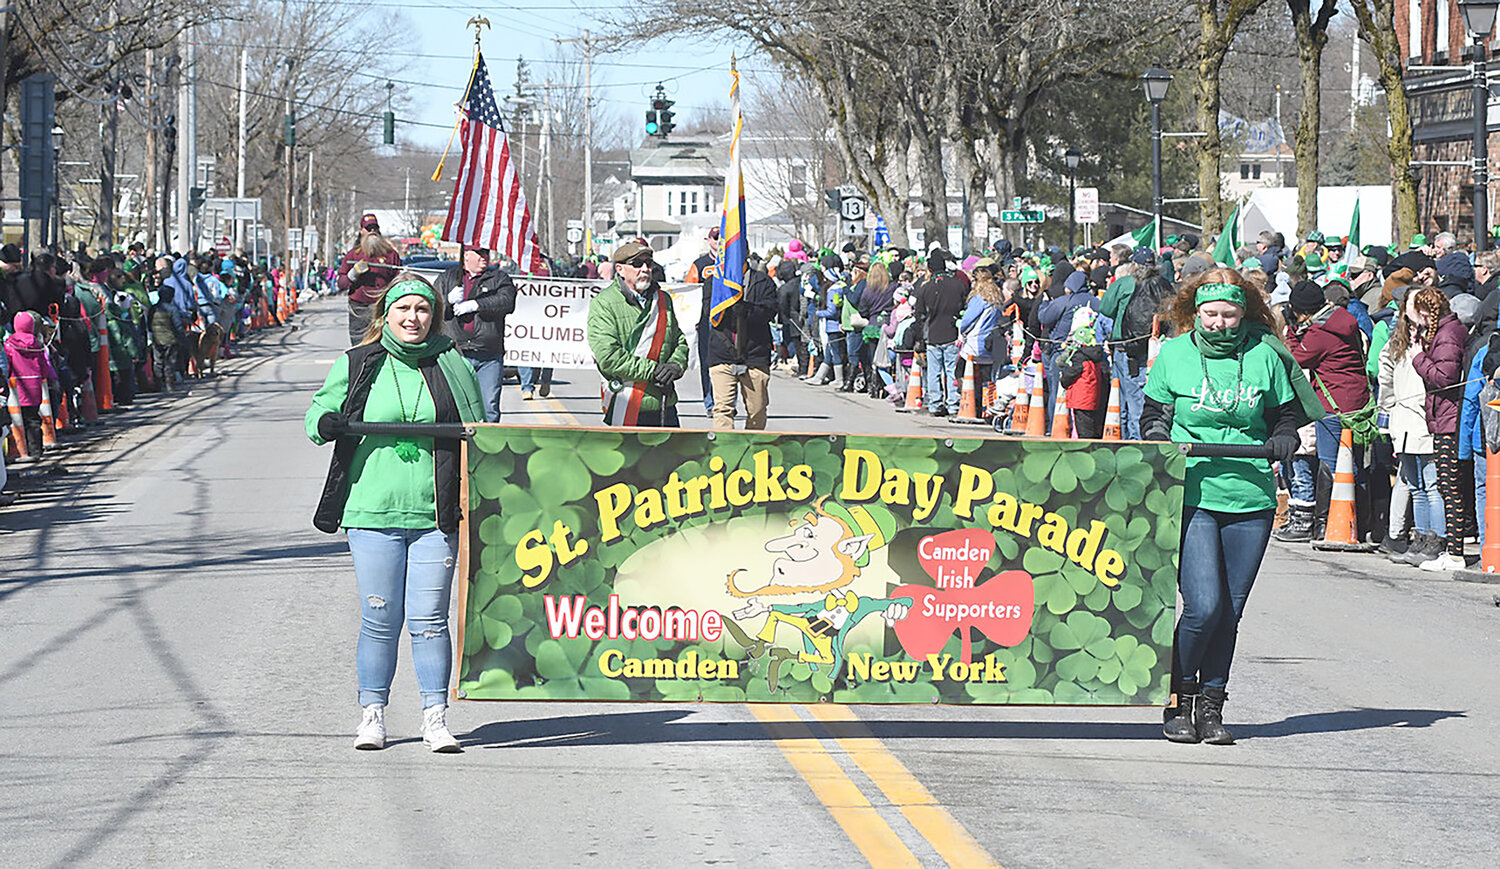 The annual Camden NY Irish Parade returns at 1 p.m. Saturday, March 18 in Camden. Line up is at 11 a.m. at Camden Elementary School, 1 Oswego St.